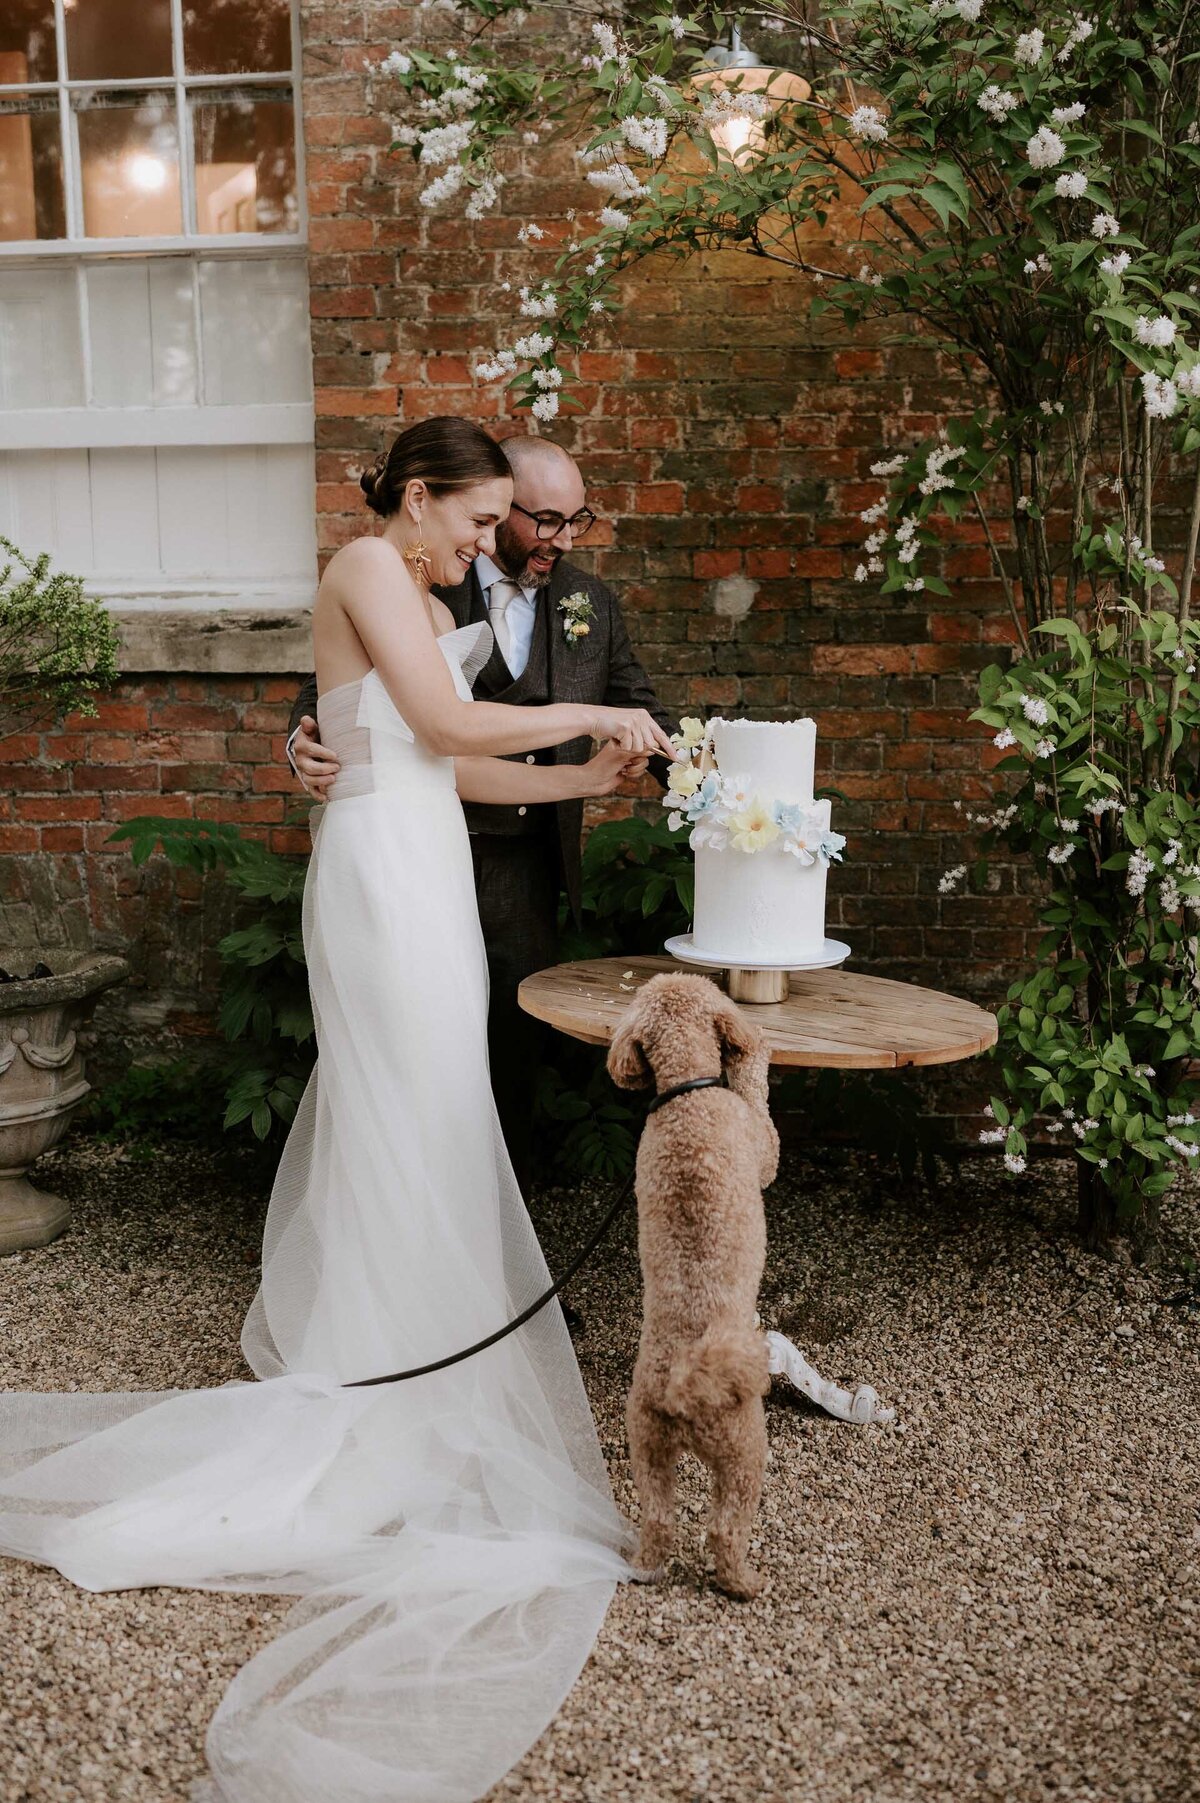 aswarby-rectory-wedding-photographer-linsey-james-laura-williams-photography27